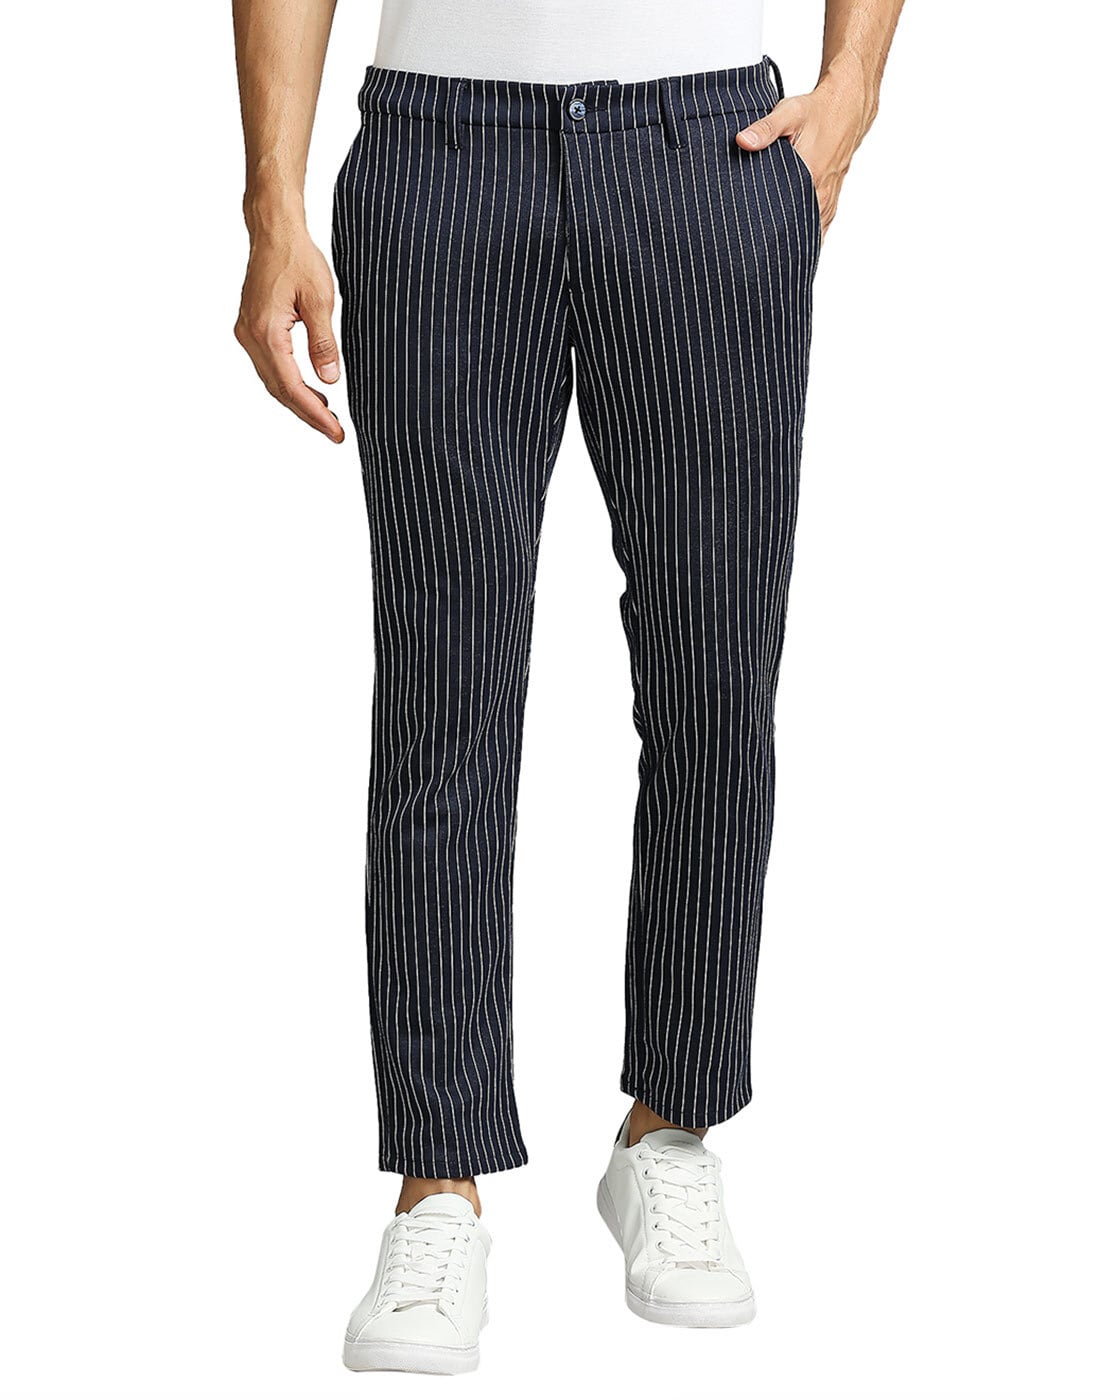 Men Striped Suit Pants Trousers Stretch Slim Casual Smart Business Work  Casual | eBay